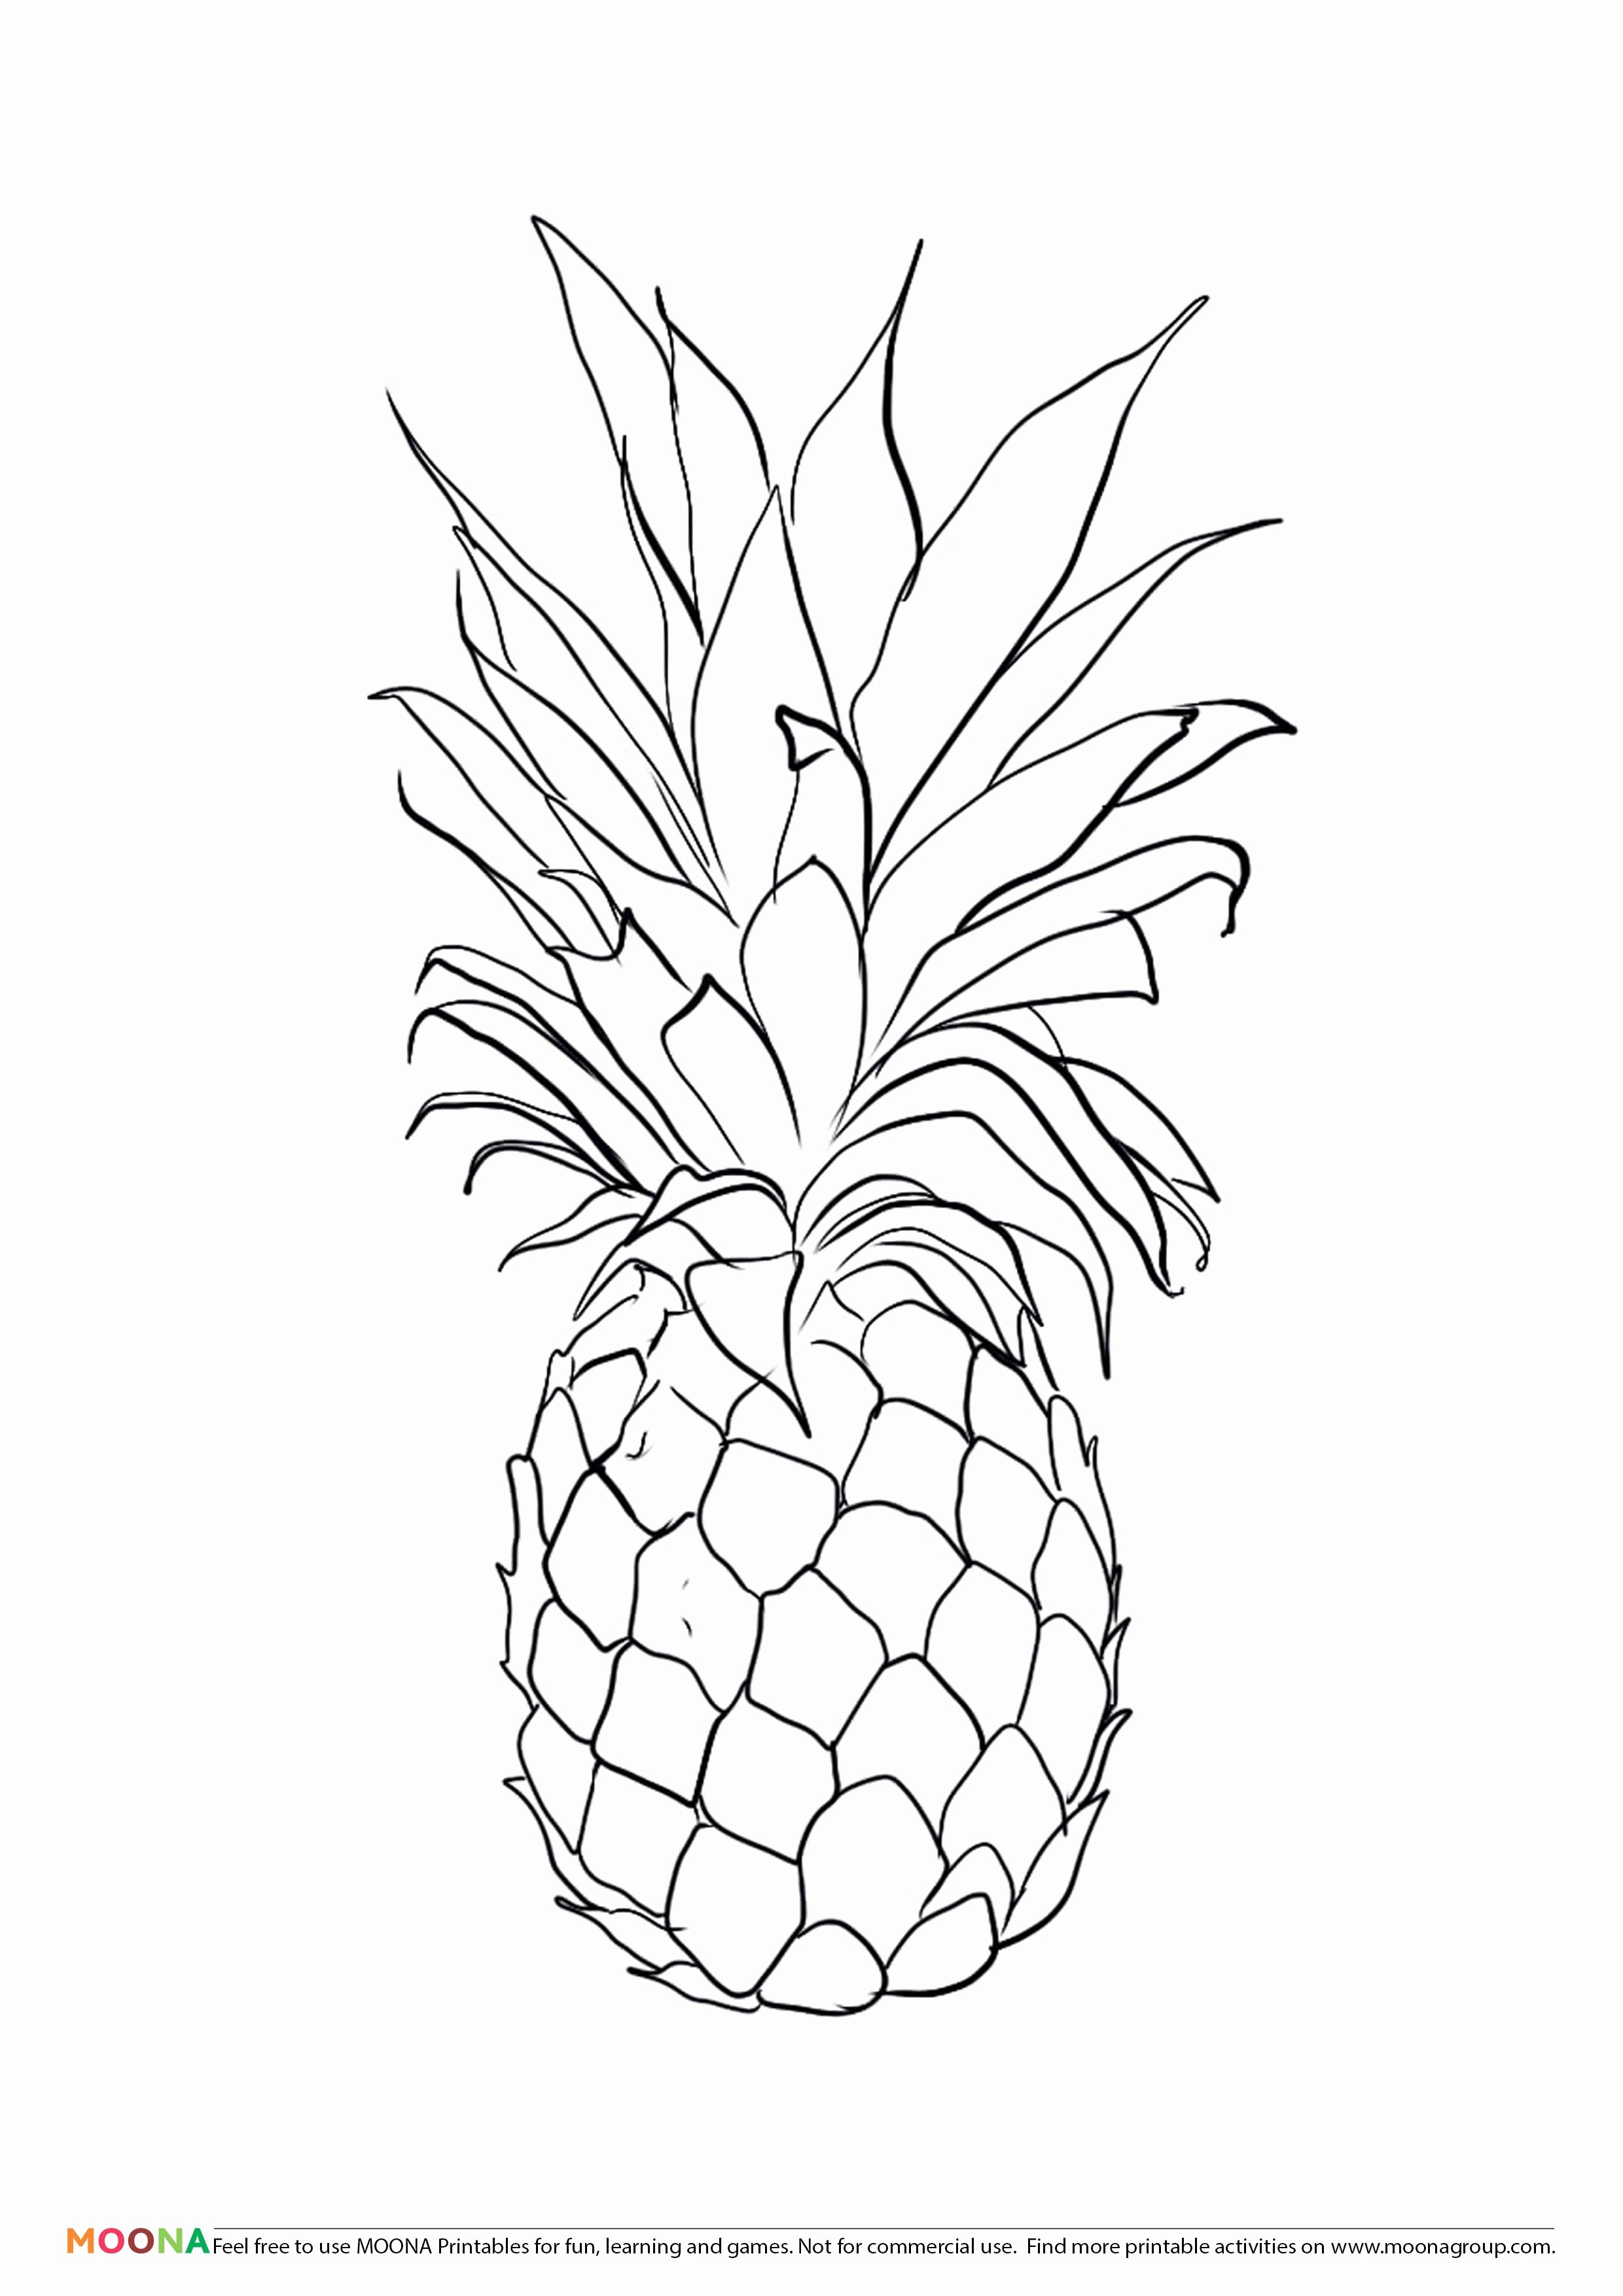 Pineapple Template Printable Elegant Free Printable Coloring Pages for toddlers and